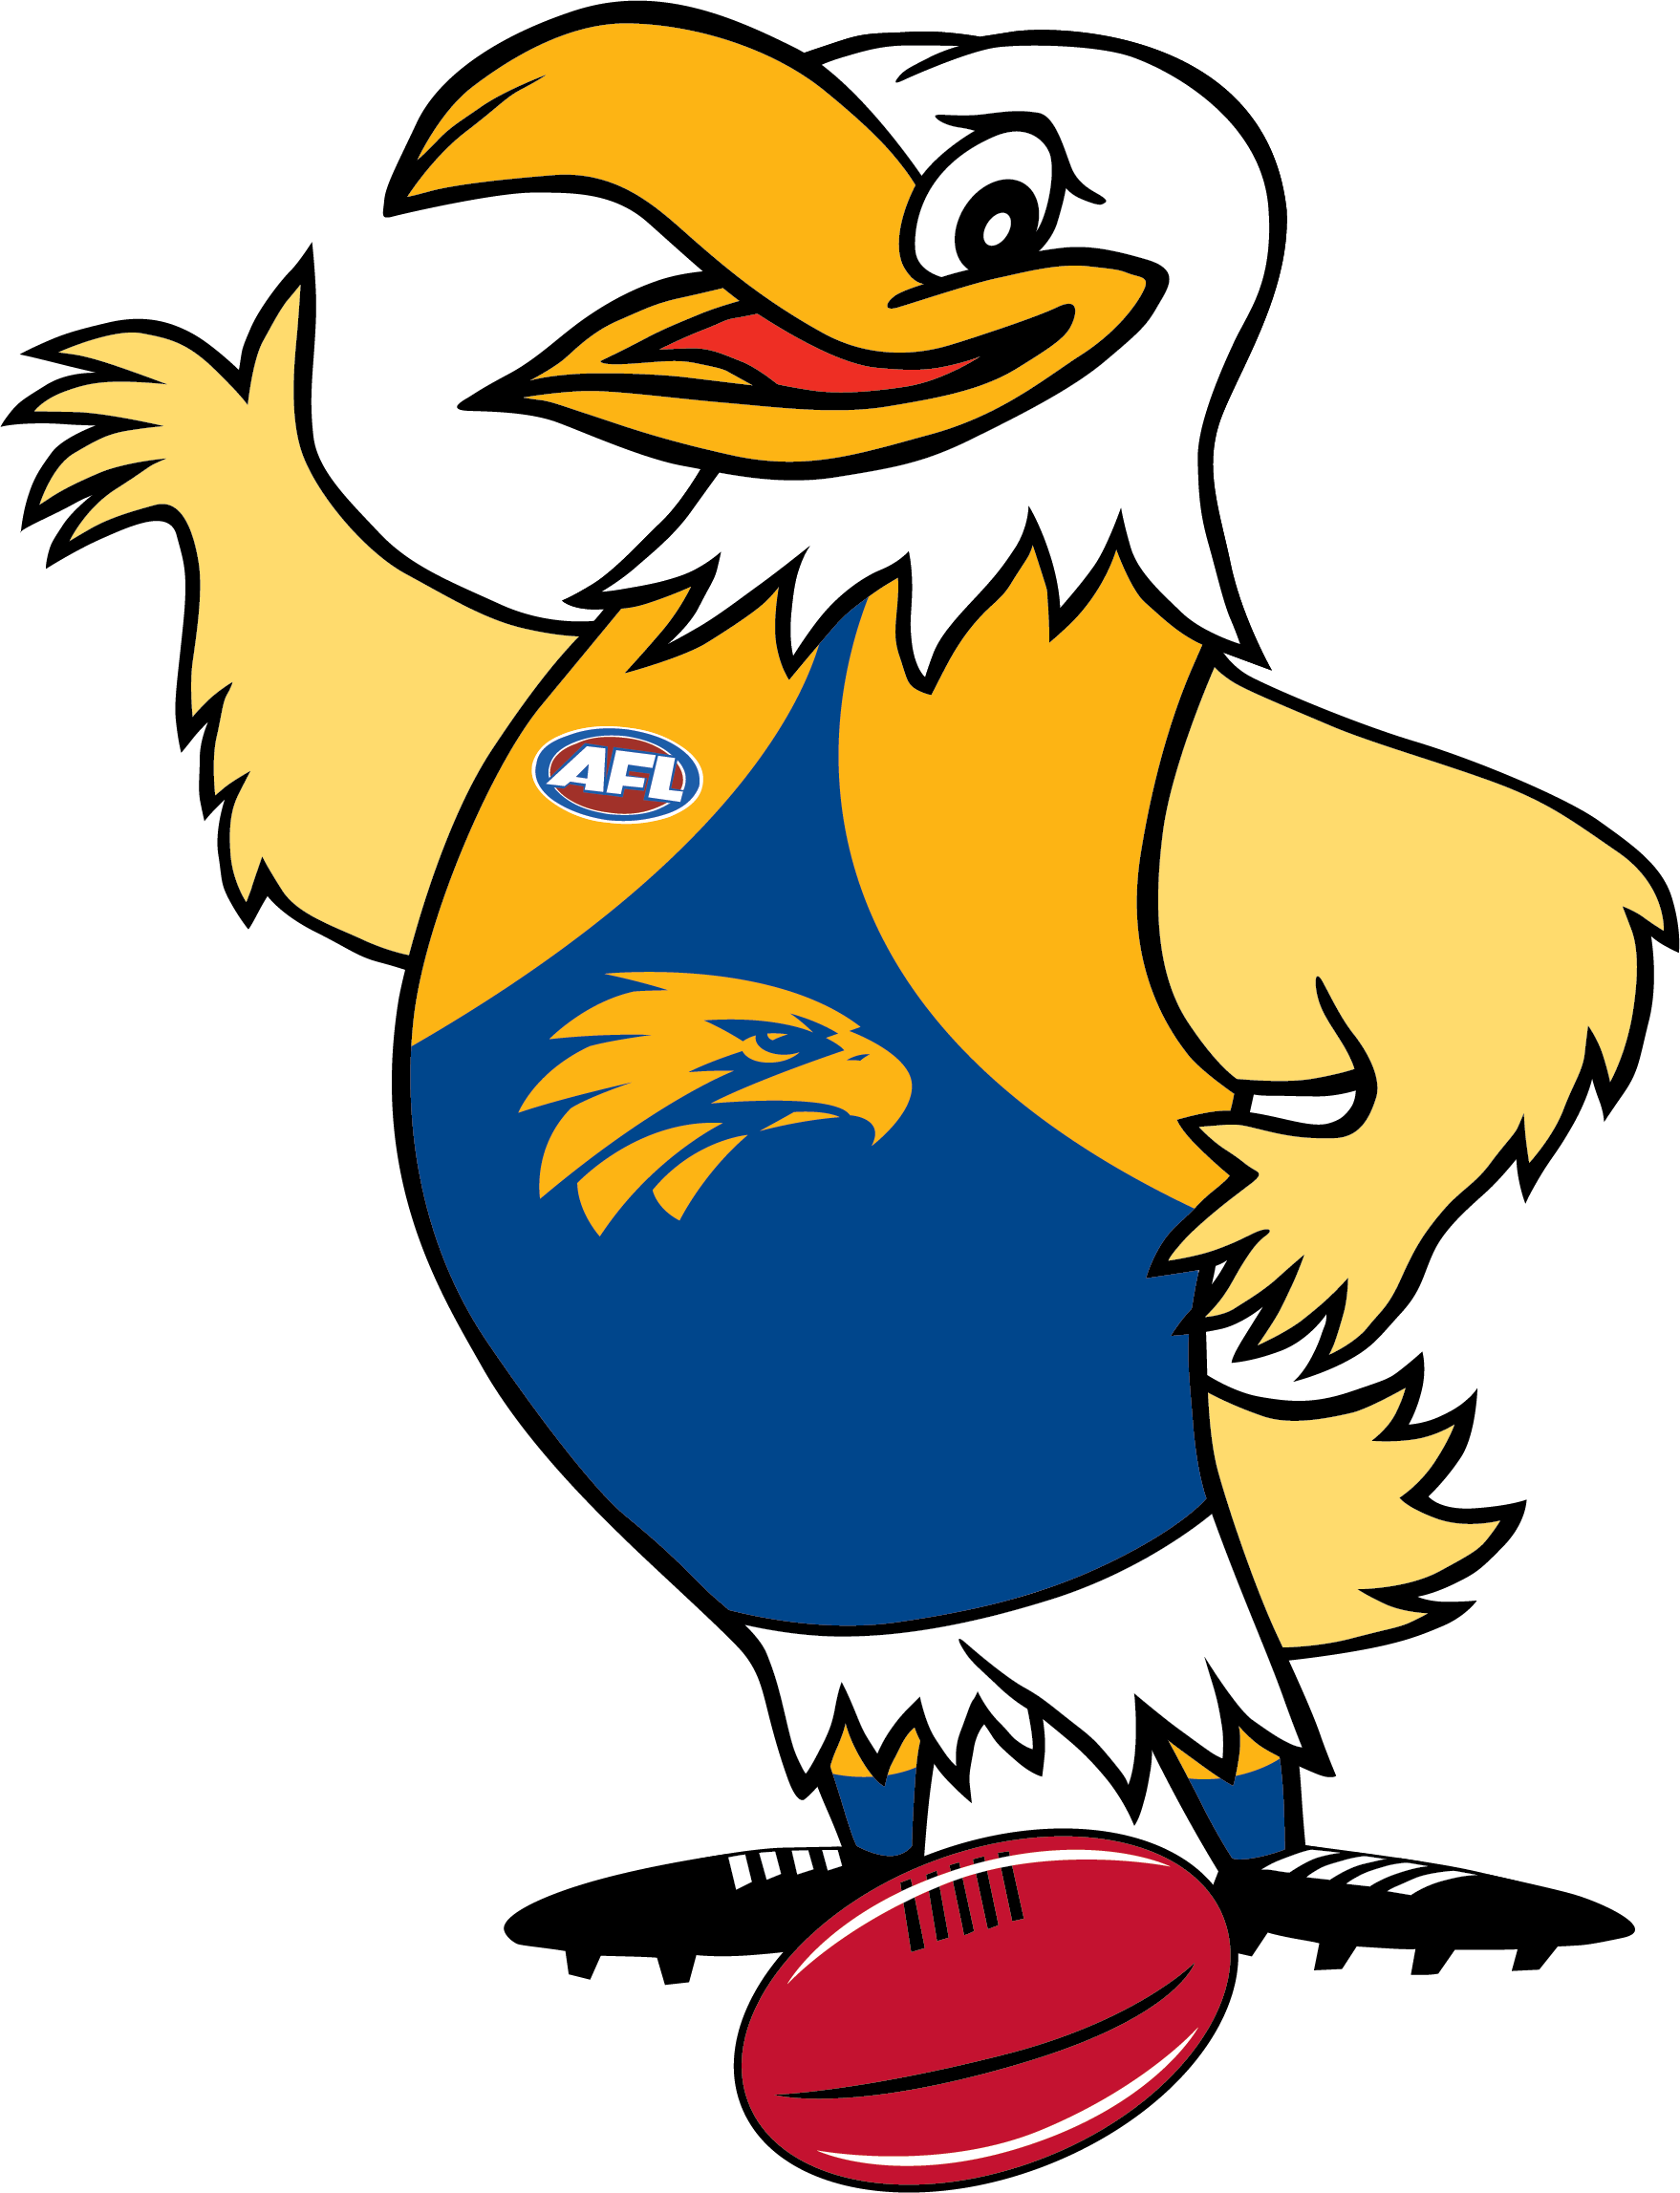 *if You Are Purchasing This Membership As A Gift, Be - West Coast Eagles 2018 Team (1758x2295)